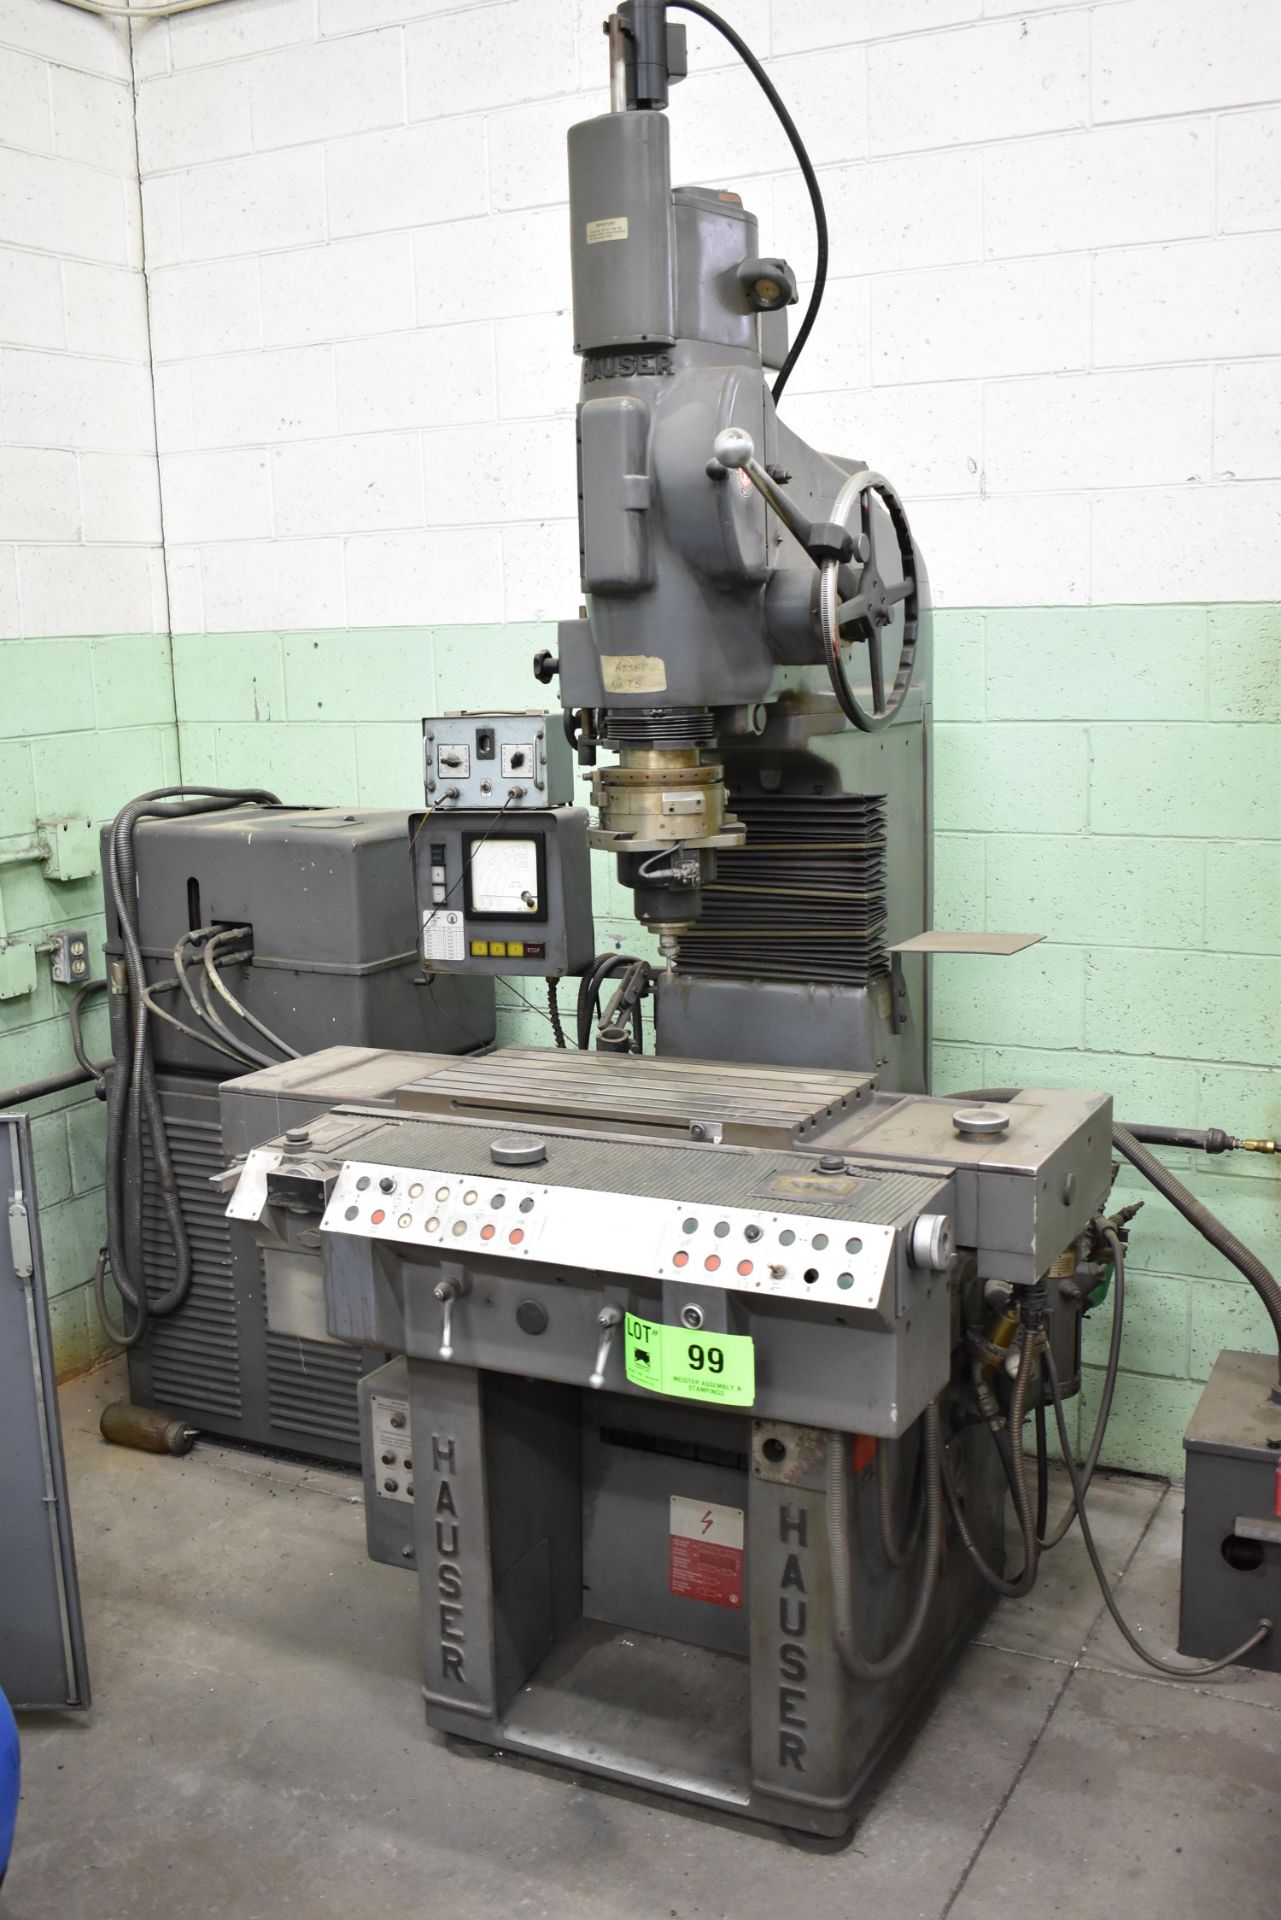 HENRI HAUSER 3SM.O JIG GRINDER WITH SPEEDS TO 80,000RPM, 12.5" X 23.25" T-SLOT TABLE, S/N: 80 [